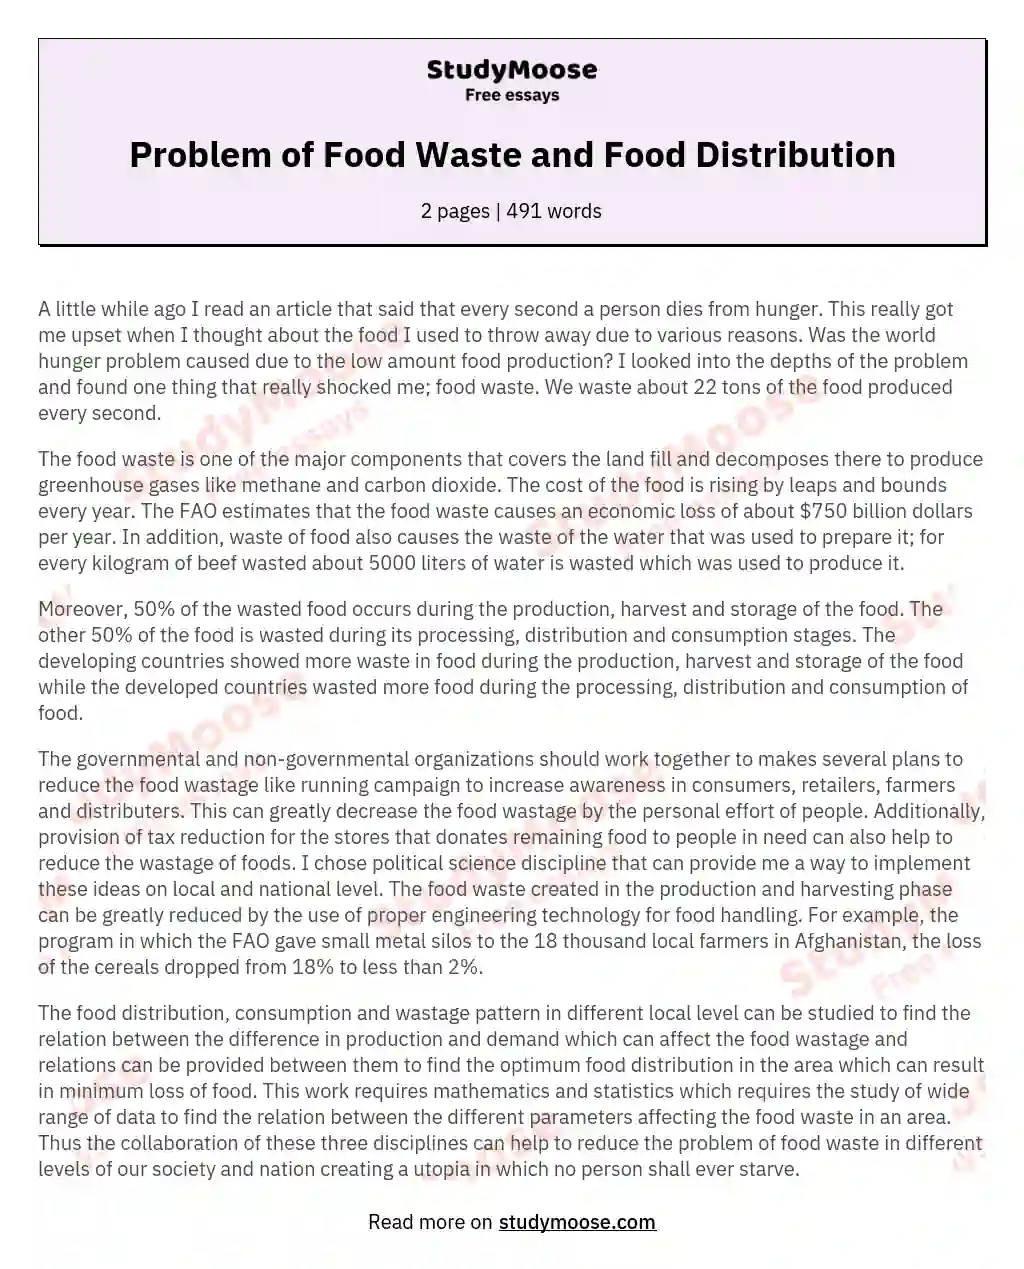 Problem of Food Waste and Food Distribution